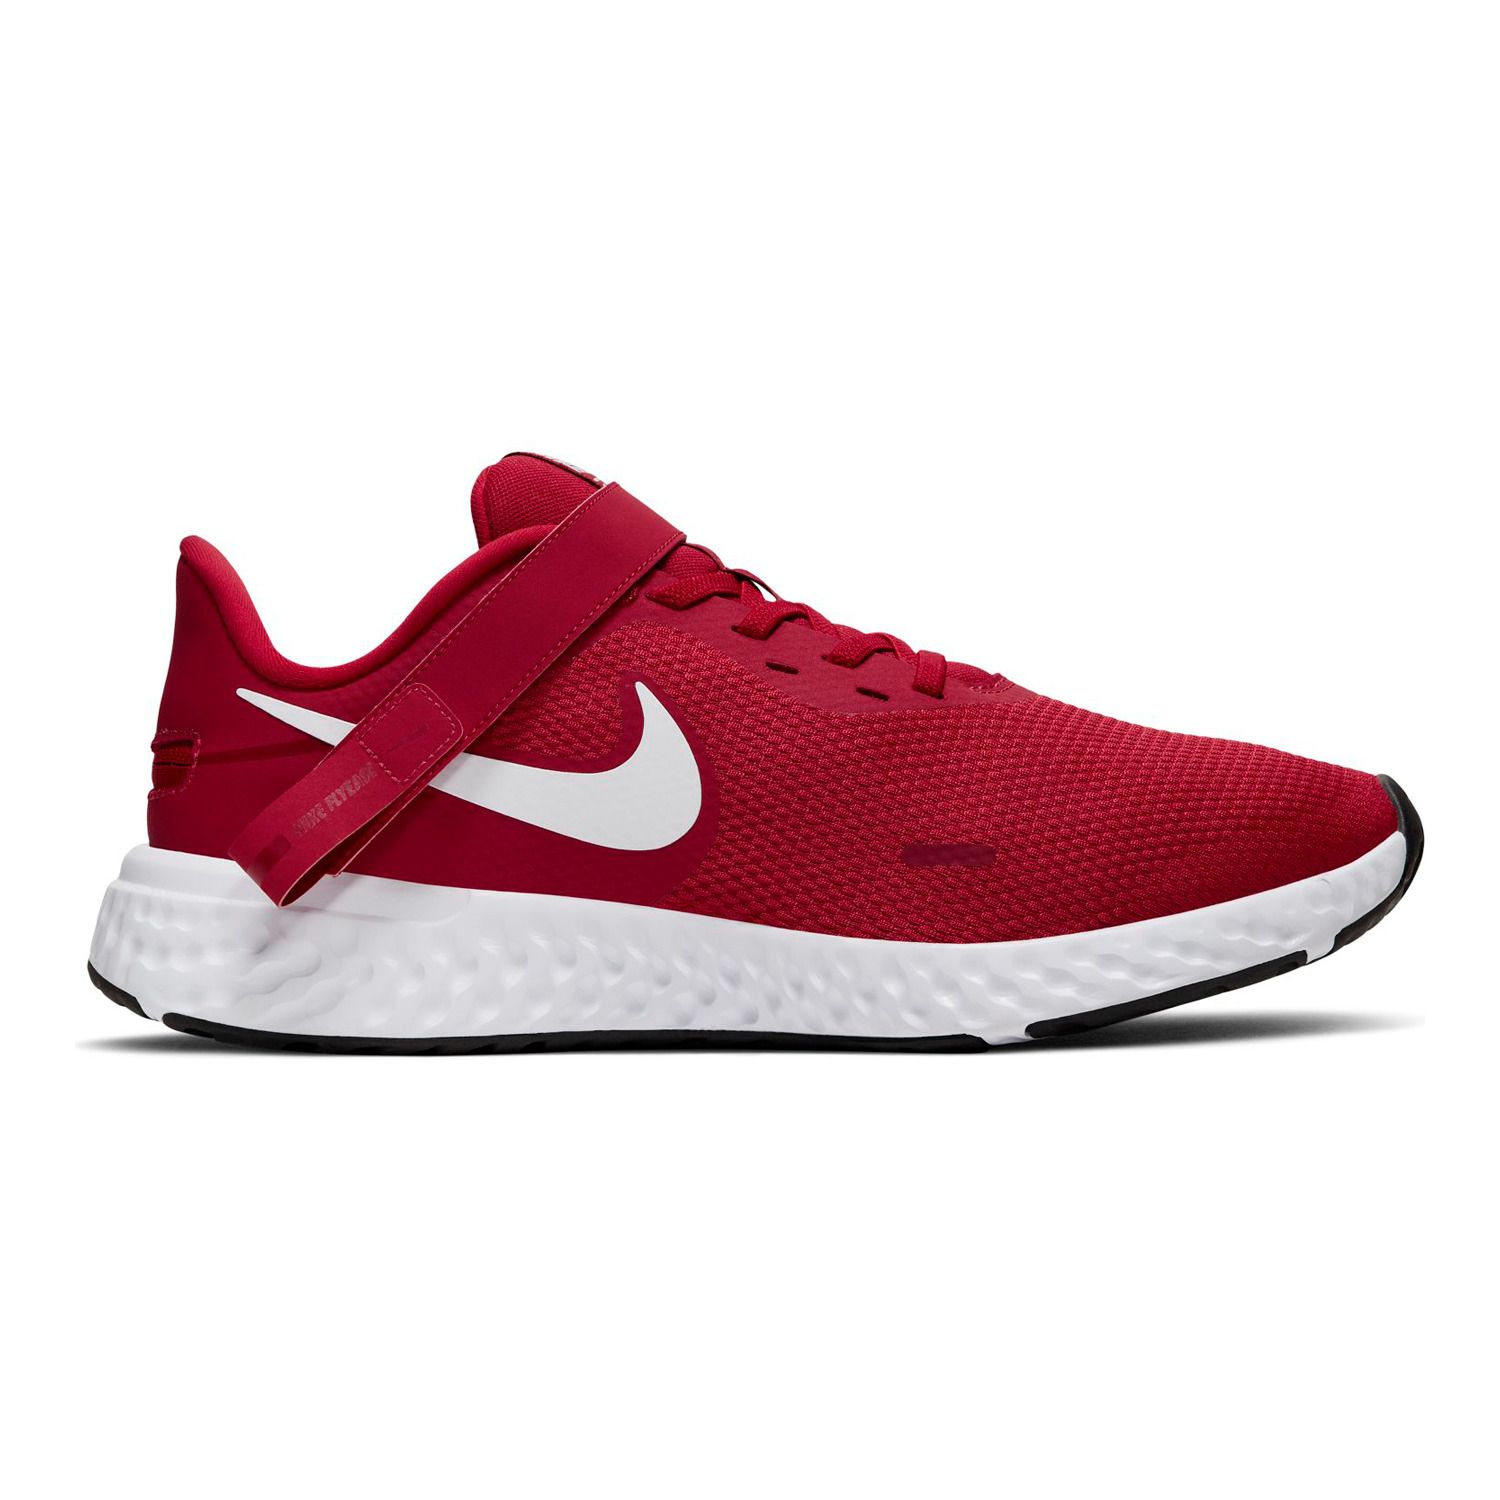 red tennis shoes womens nike